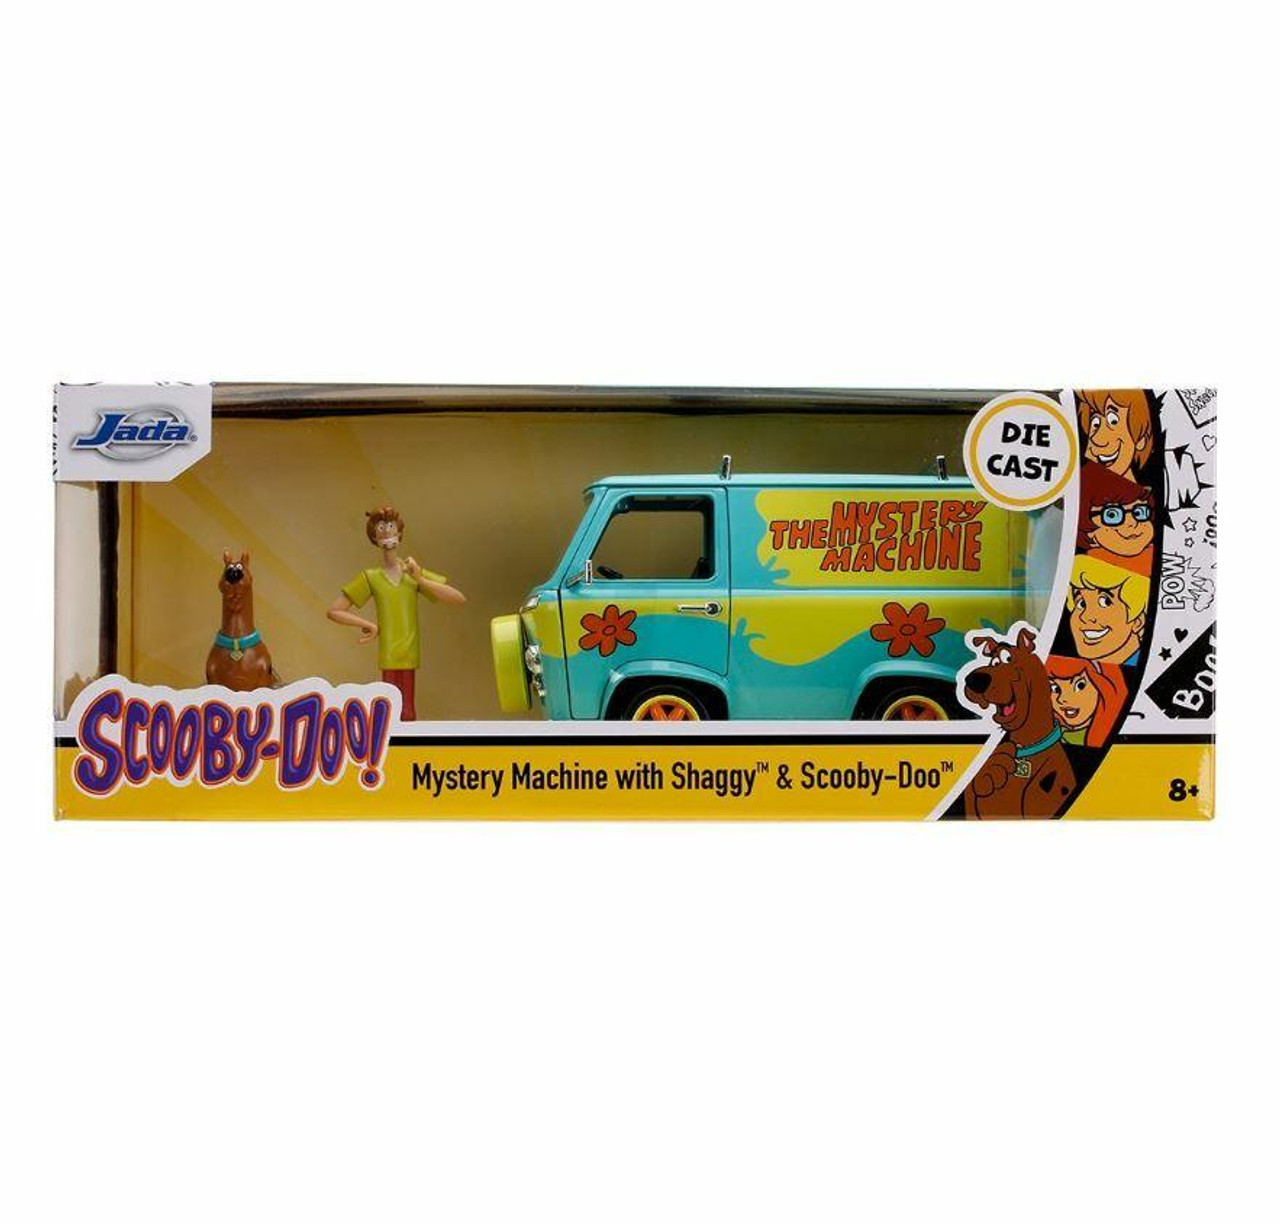 https://cdn11.bigcommerce.com/s-cy4lua1xoh/images/stencil/1280x1280/products/12563/71442/scooby-doo-mystery-machine-with-scooby-and-shaggy-figures-124-die-cast-vehicle-preorder-expected-ship-date-june-2022__20374.1654591220.jpg?c=1?imbypass=on